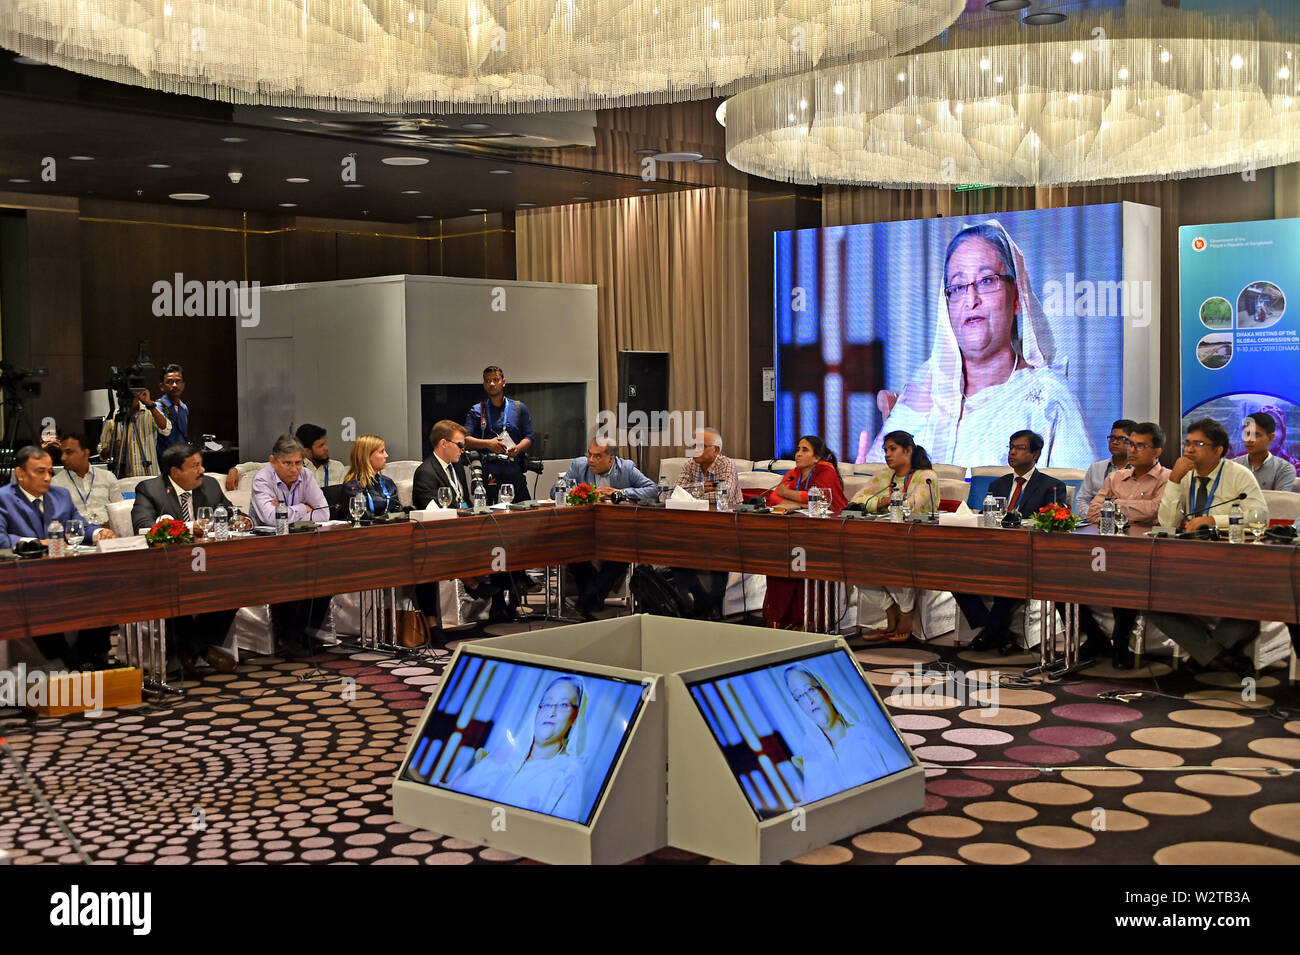 (190710) -- DHAKA, July 10, 2019 (Xinhua) -- Photo taken on July 10, 2019 shows a session of the Dhaka Meeting of the Global Commission on Adaptation (GCA) in Dhaka, Bangladesh. Bangladeshi Prime Minister Sheikh Hasina on Wednesday called upon all for further efforts to raise awareness among global leaders about climate change. She made the plea while inaugurating a two-day meeting of the Global Commission on Adaptation in the capital Dhaka. (Str/Xinhua) Stock Photo